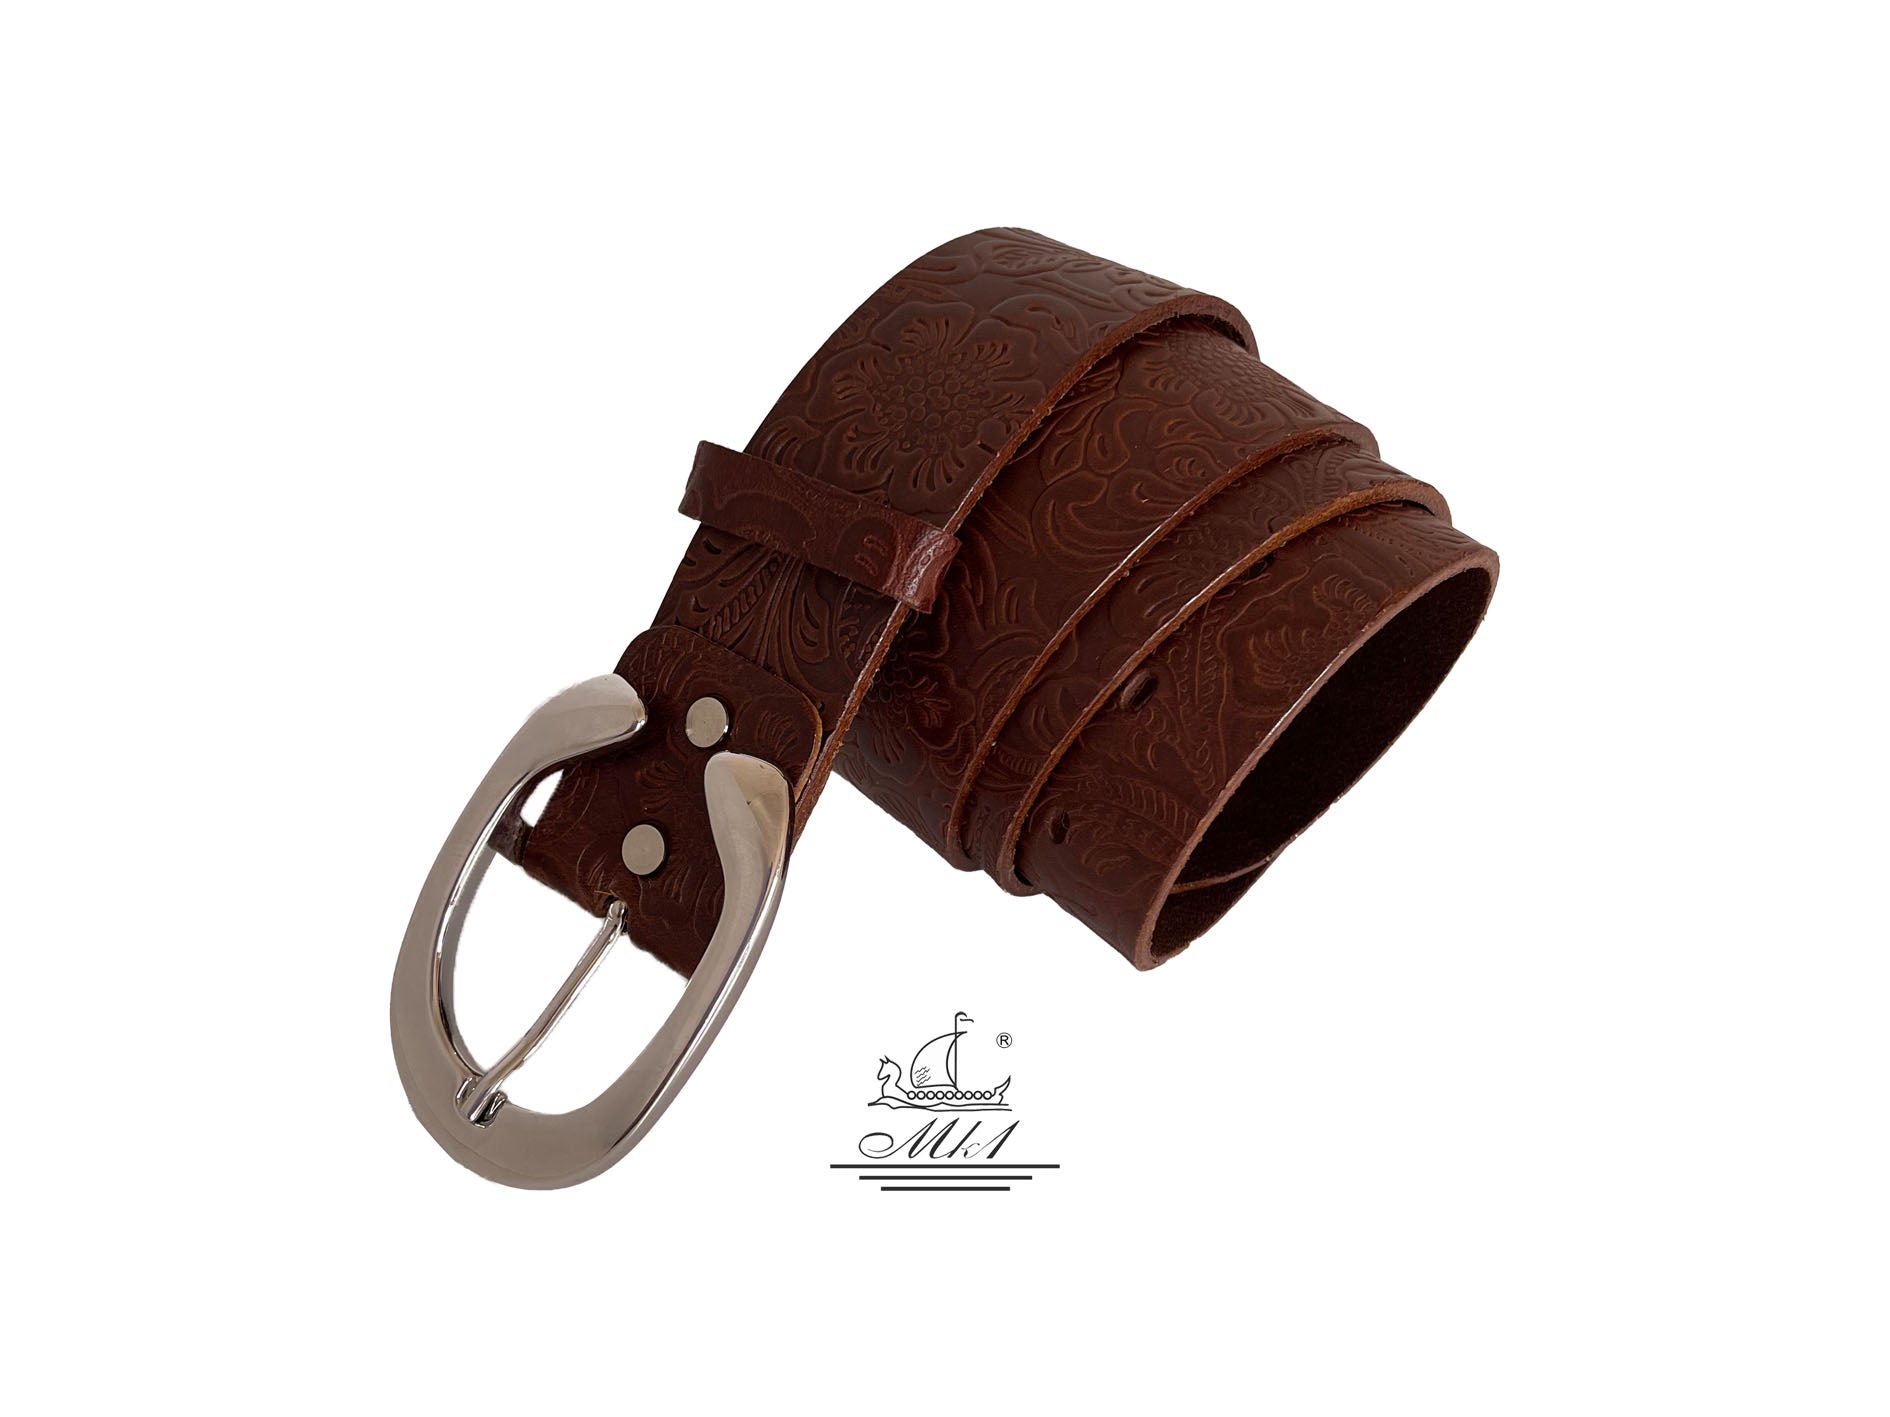 Unisex 4cm wide belt handcrafted from brown leather with flower design. 101294/40BR/LD